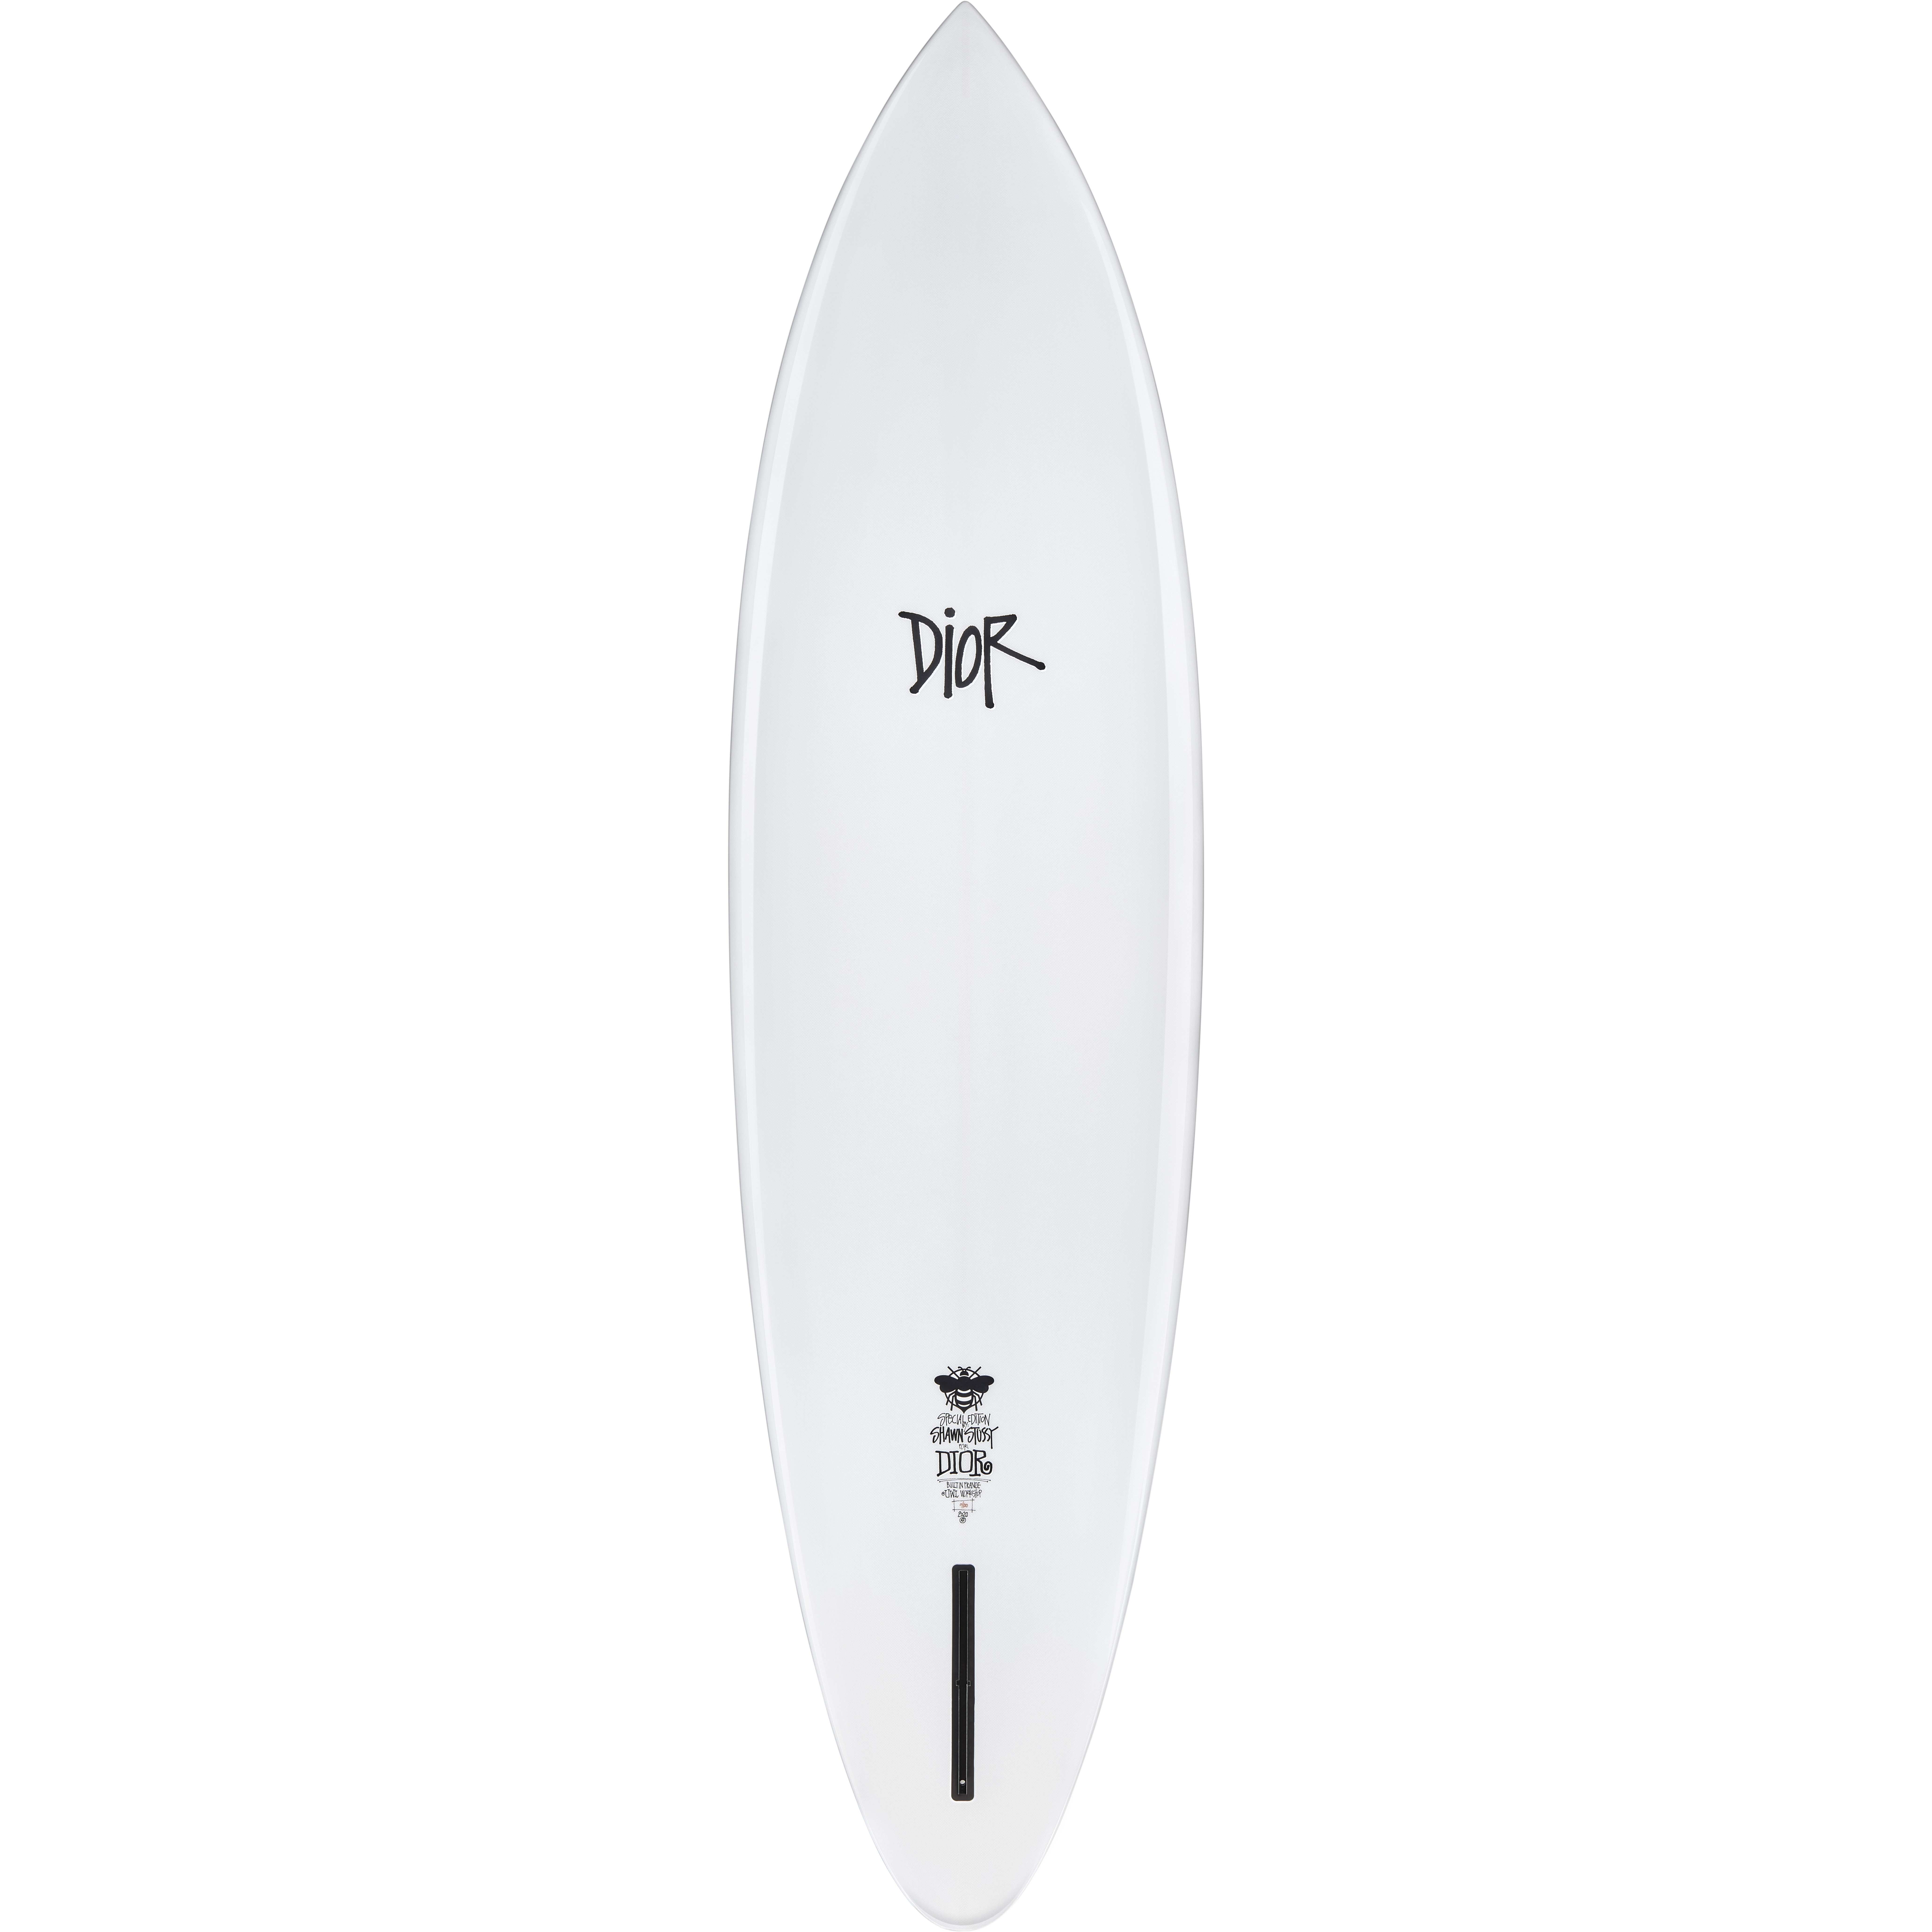 Dior and Shawn Stussy Launch Collaborative Surfboard - ICON